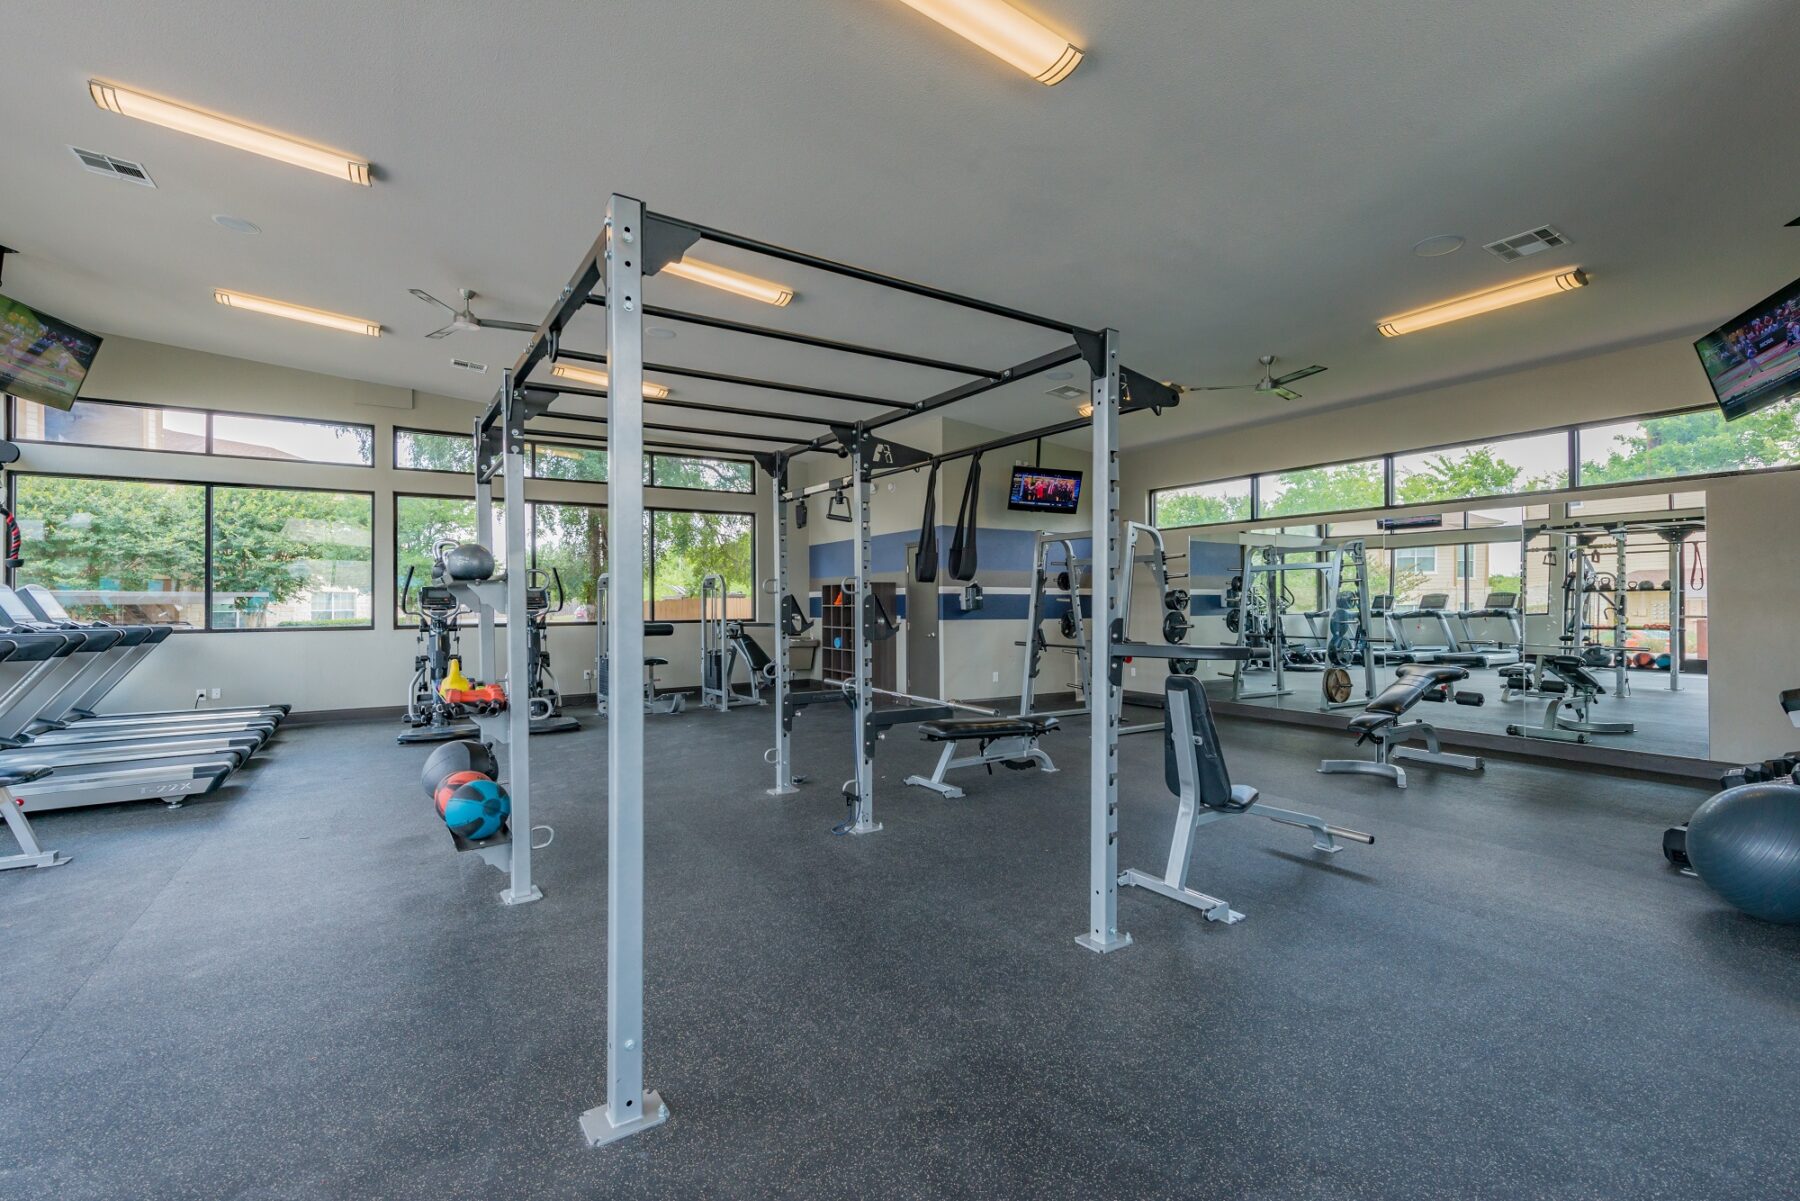 Laurel Canyon brand new gym with ceiling fans, tvs, strength, cardio, and big windows